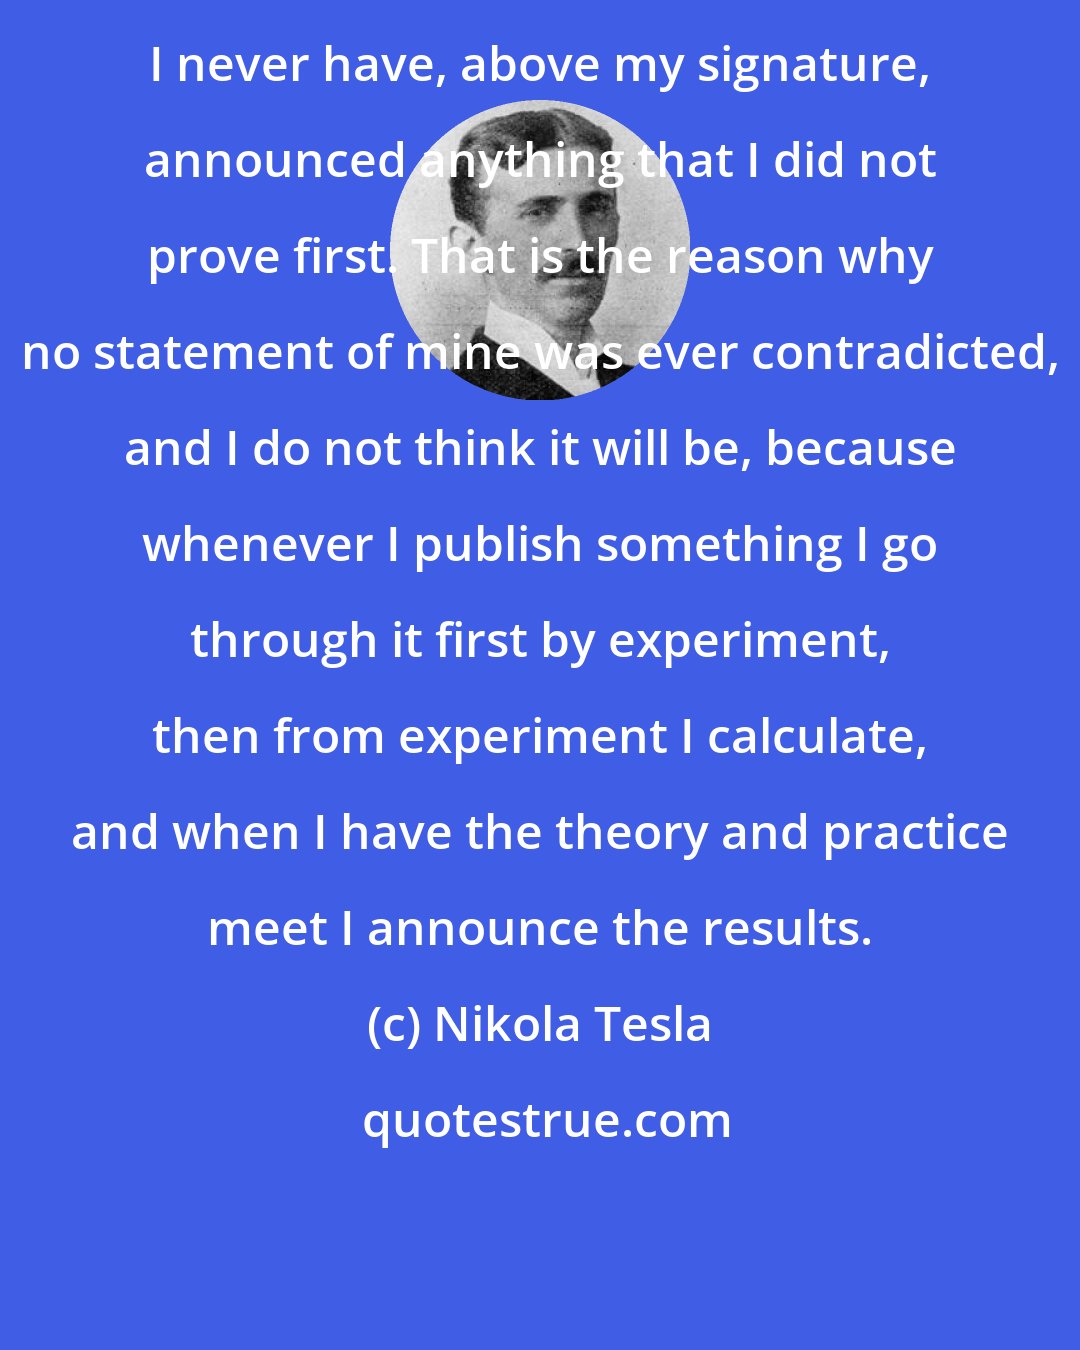 Nikola Tesla: I never have, above my signature, announced anything that I did not prove first. That is the reason why no statement of mine was ever contradicted, and I do not think it will be, because whenever I publish something I go through it first by experiment, then from experiment I calculate, and when I have the theory and practice meet I announce the results.